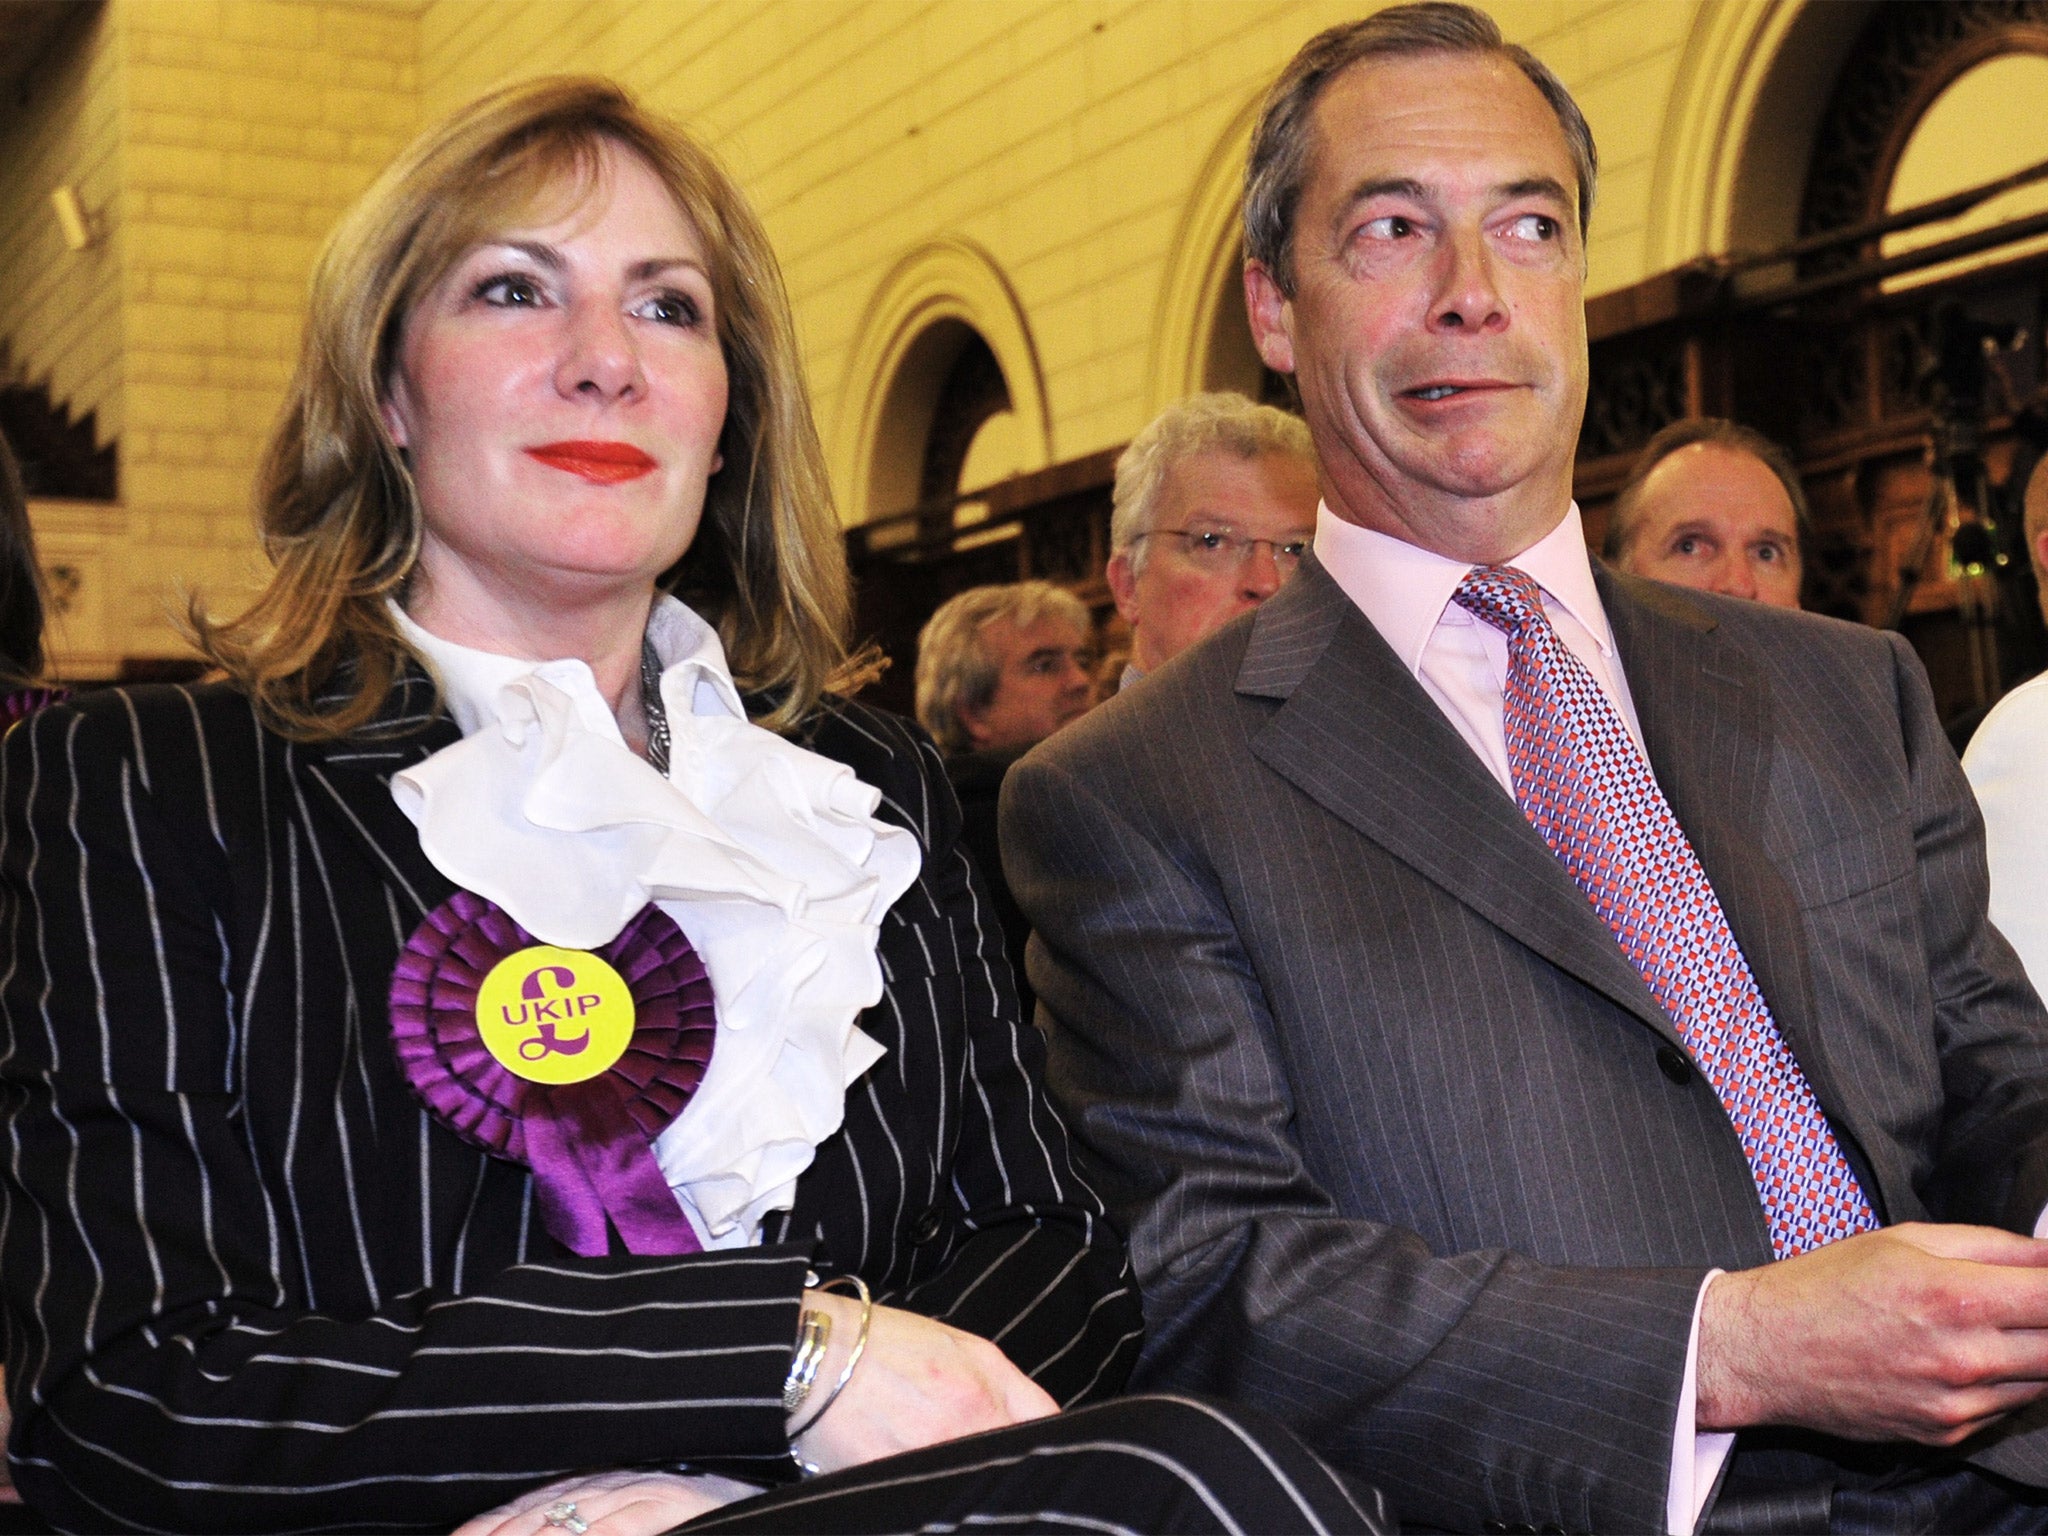 Janice Atkinson pictured with Ukip leader Nigel Farage last year